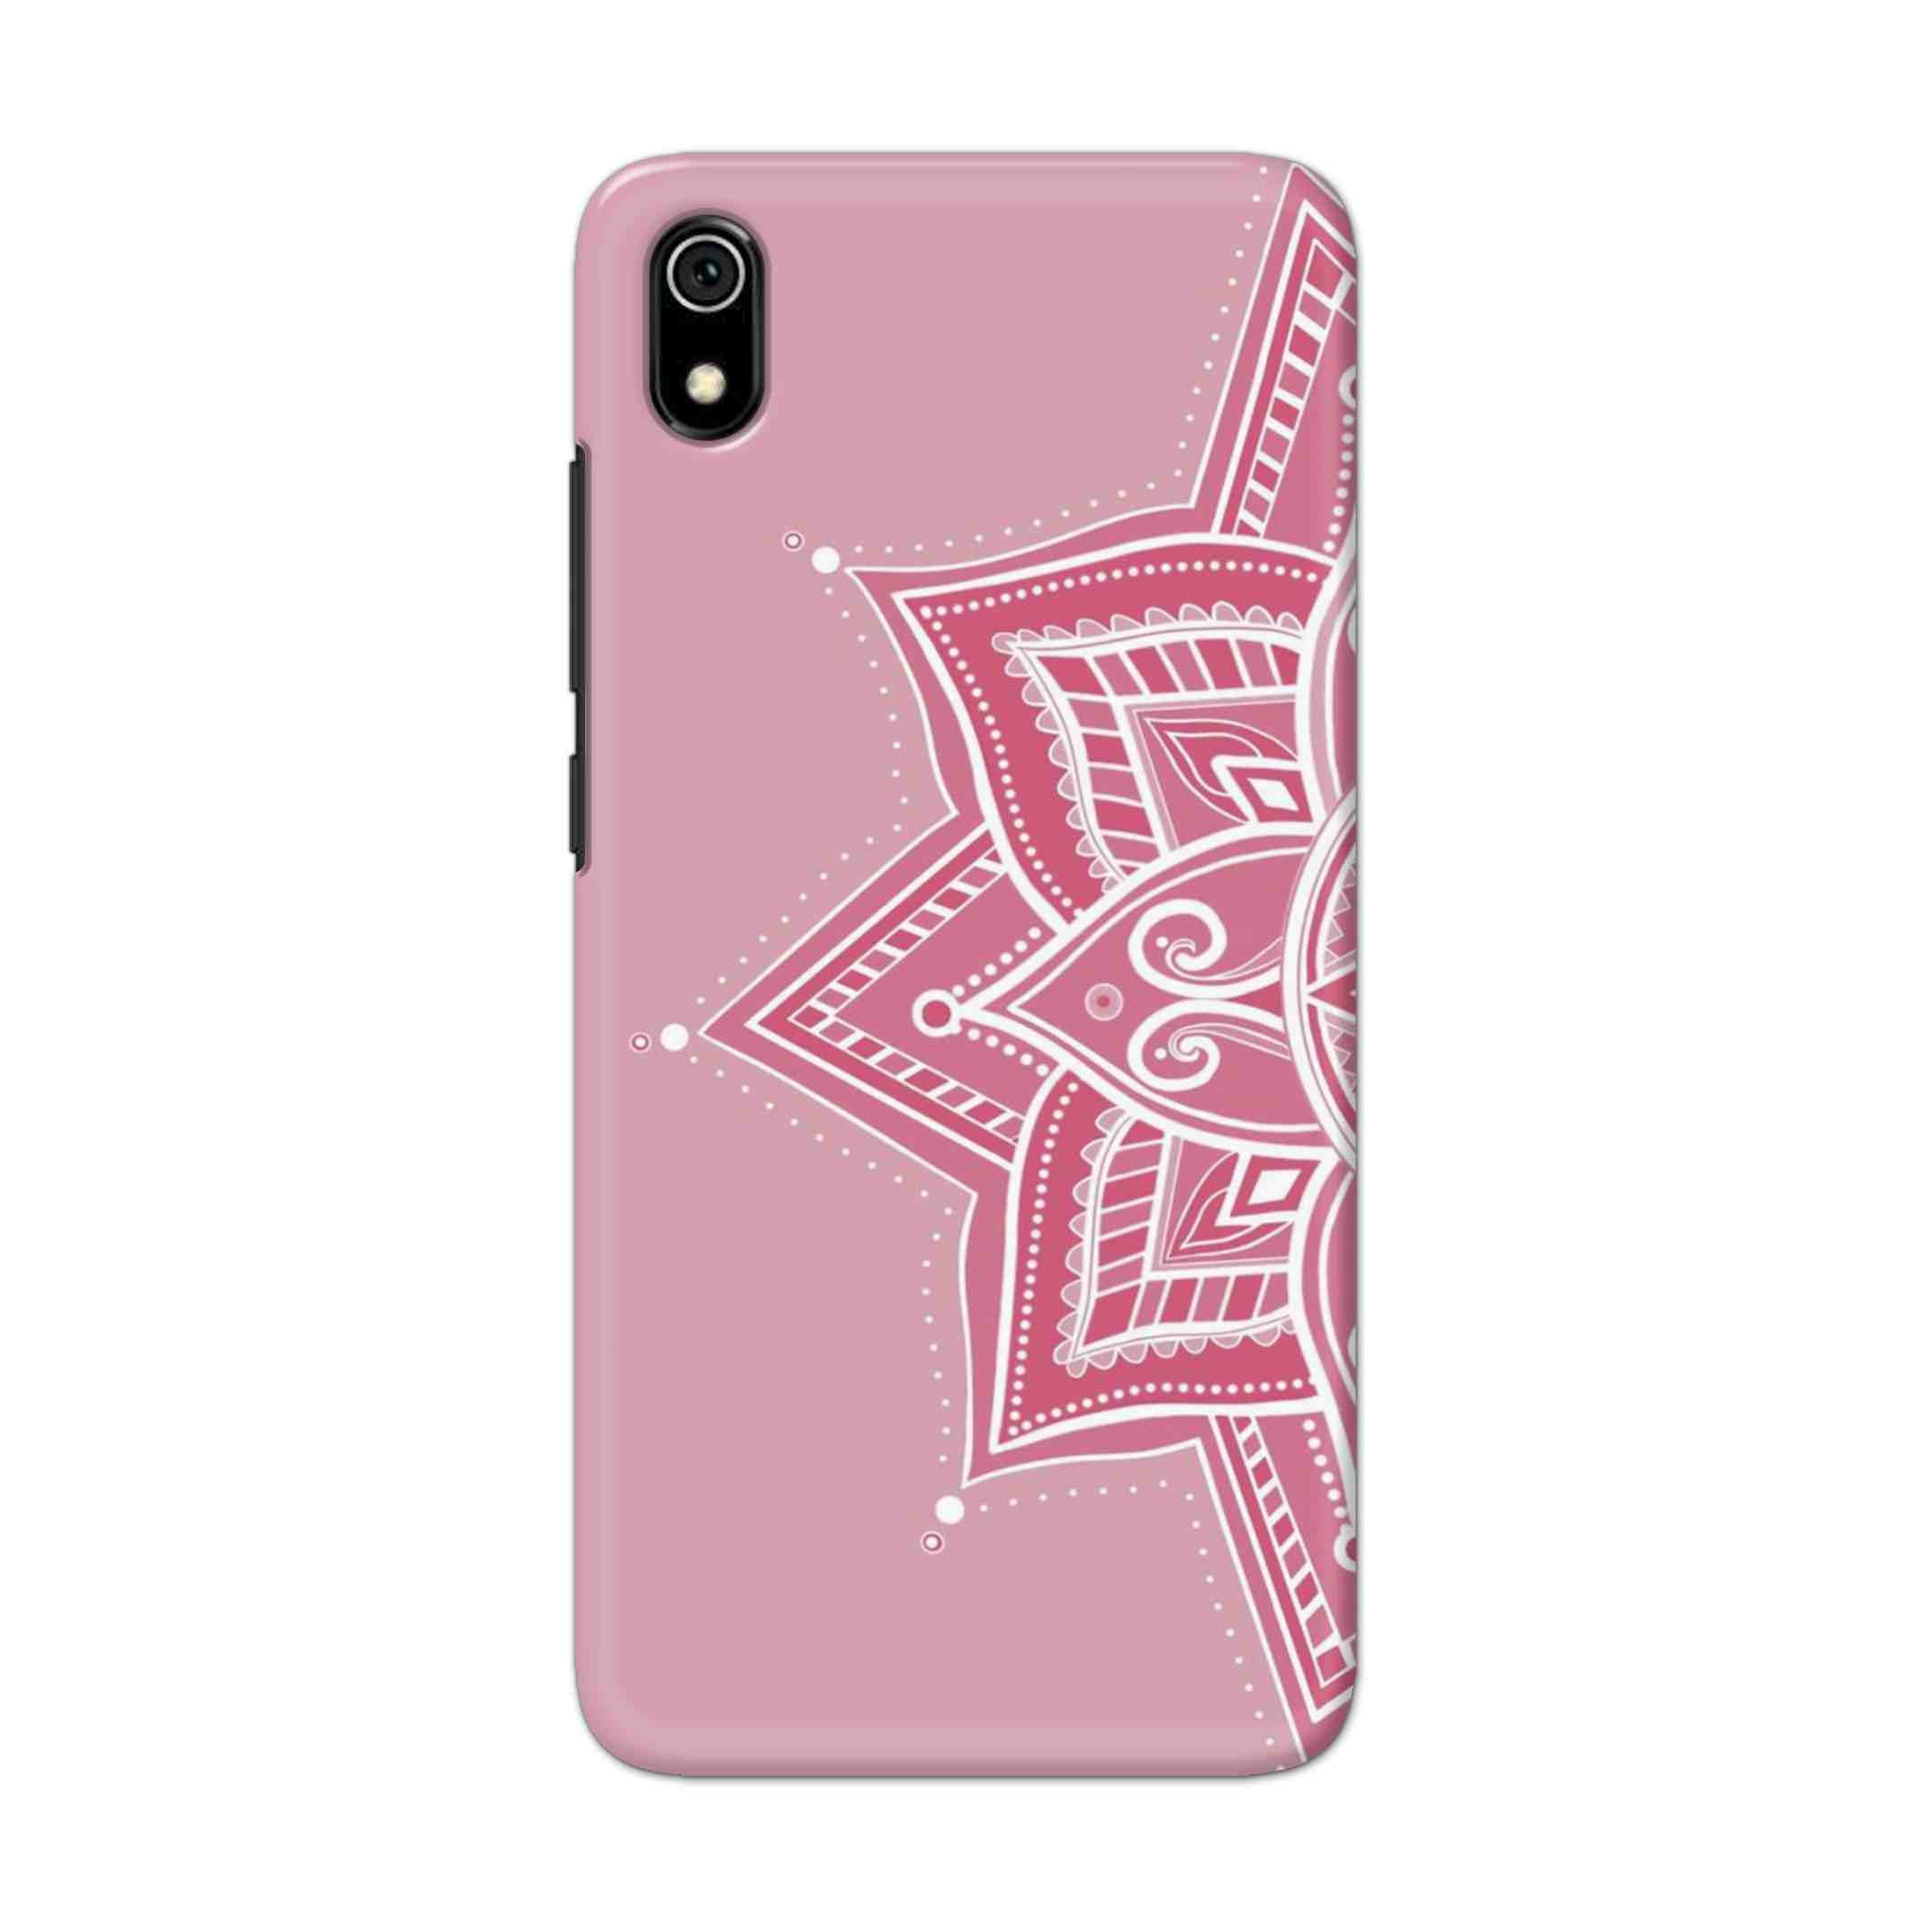 Buy Pink Rangoli Hard Back Mobile Phone Case Cover For Xiaomi Redmi 7A Online